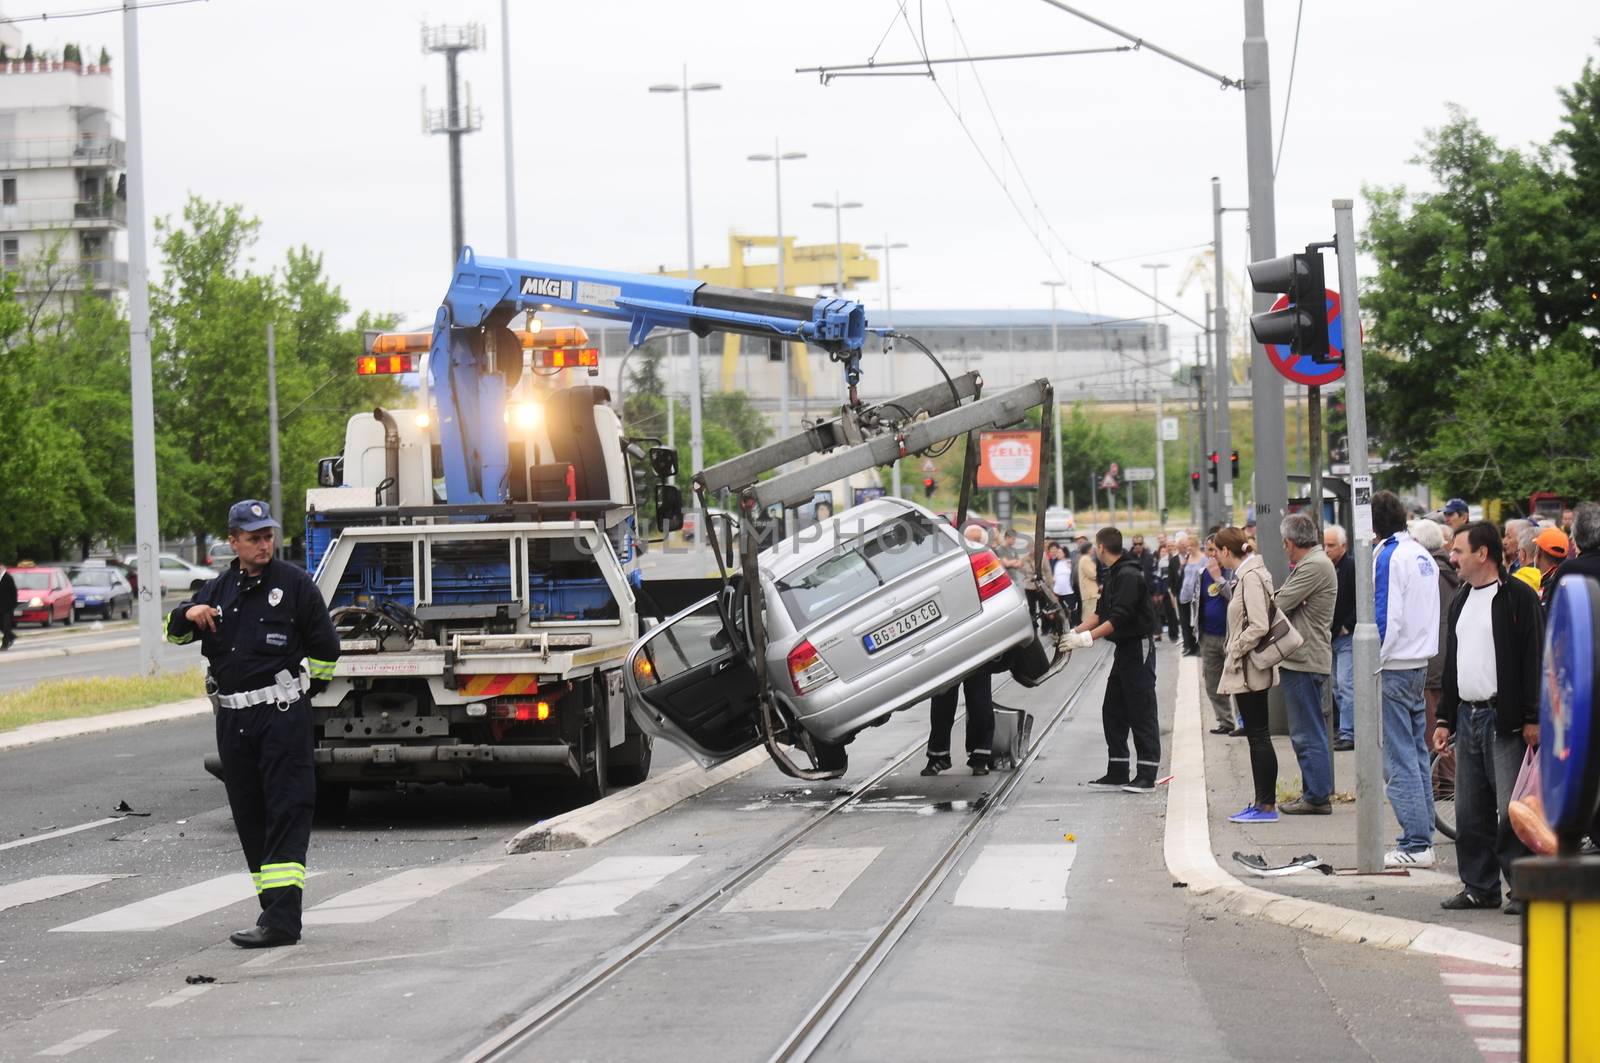 SERBIA, BELGRADE - MAY 12, 2013: Car towing truck takes away damaged black car after accident with tram. The car did not give priority to tram